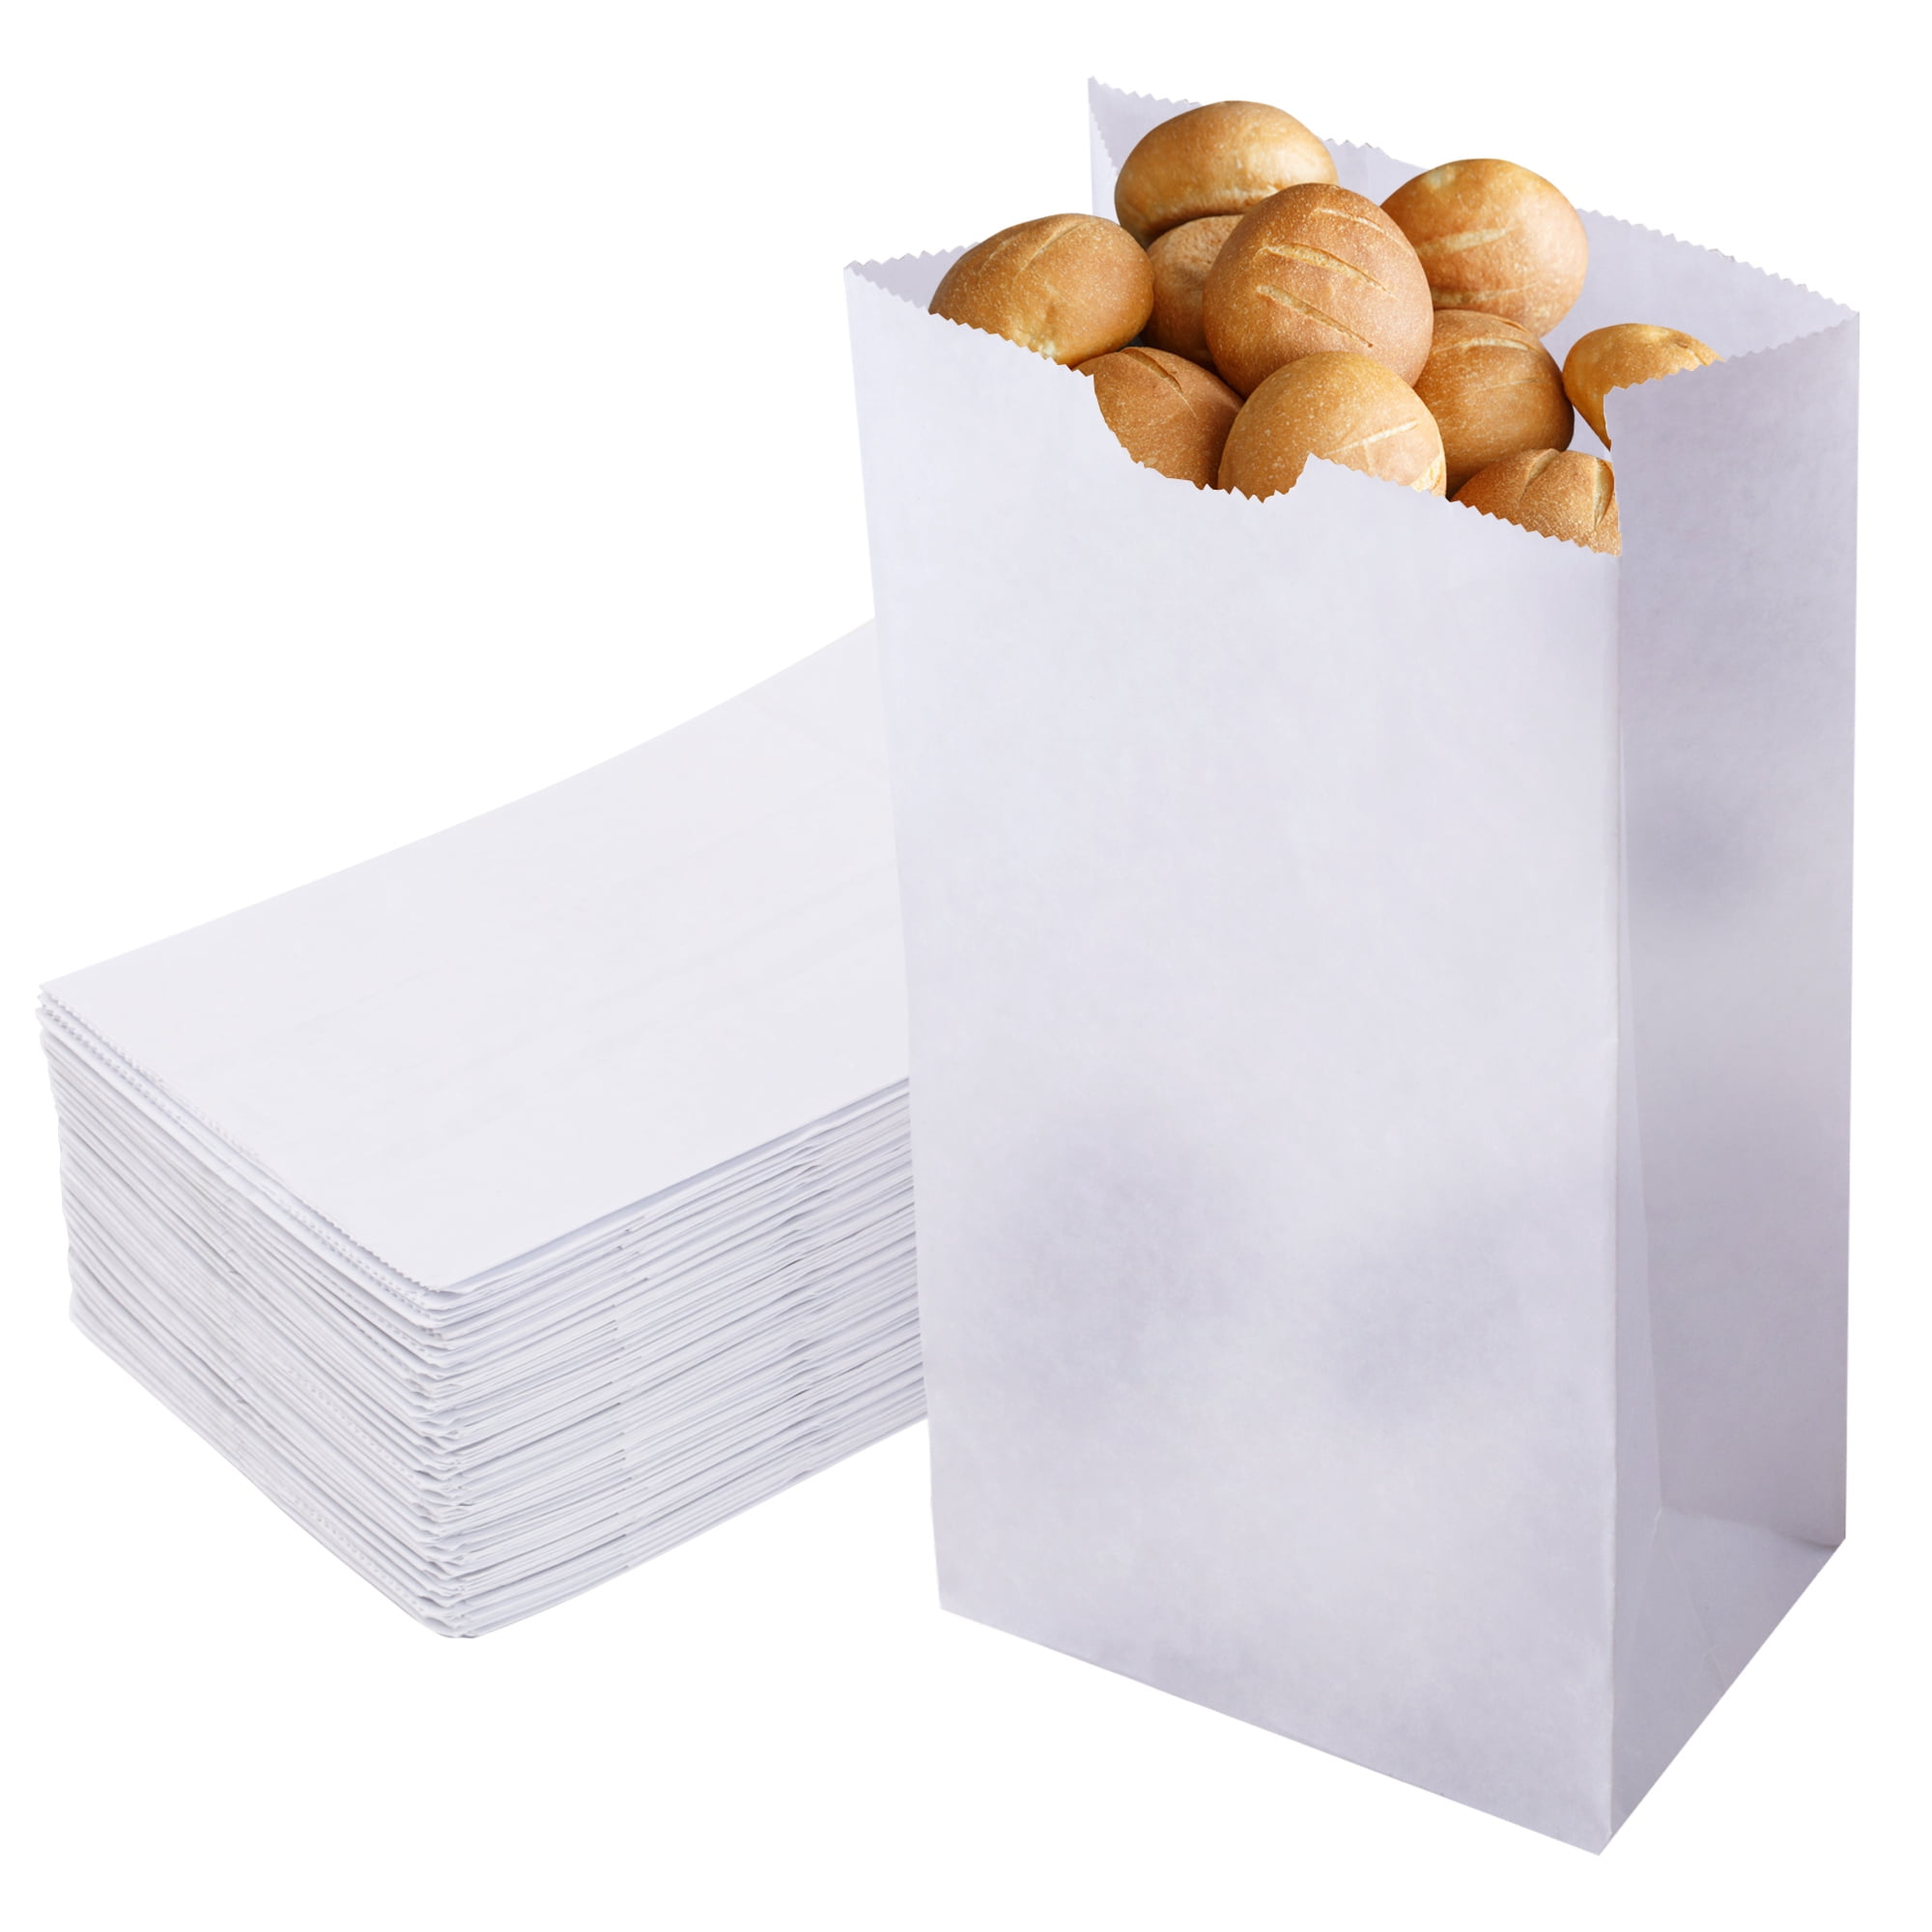 Bread Bags Craft Bags White Sack Lunch Bags Bulk 5x2.95x9.45 Inches Paper Bags BagDream Paper Lunch Bags 4lb 50Pcs Snack Bags 